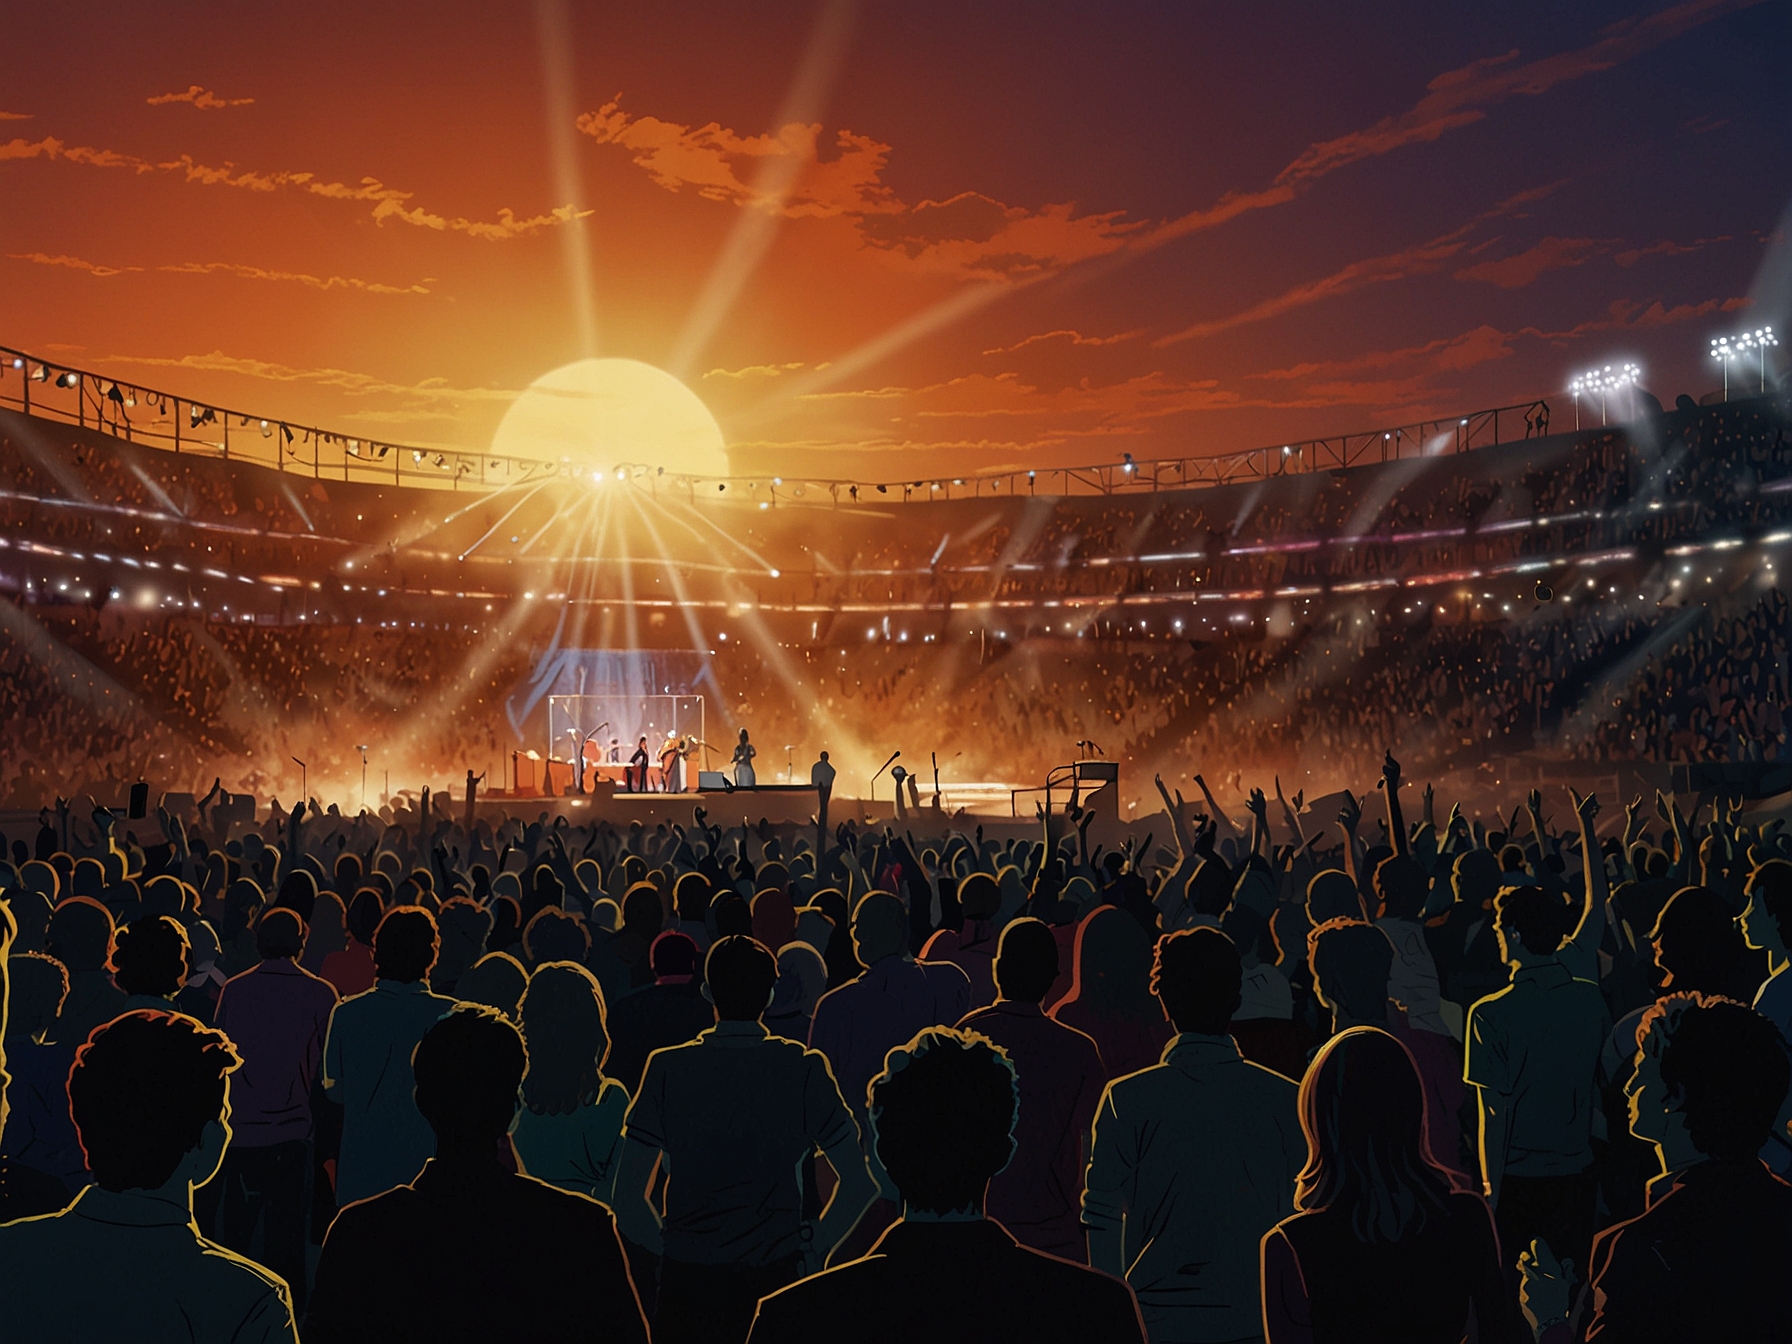 A crowded stadium at sunset, with bright lights illuminating the stage as The Rolling Stones perform, capturing the electrifying atmosphere of their iconic rock concert.